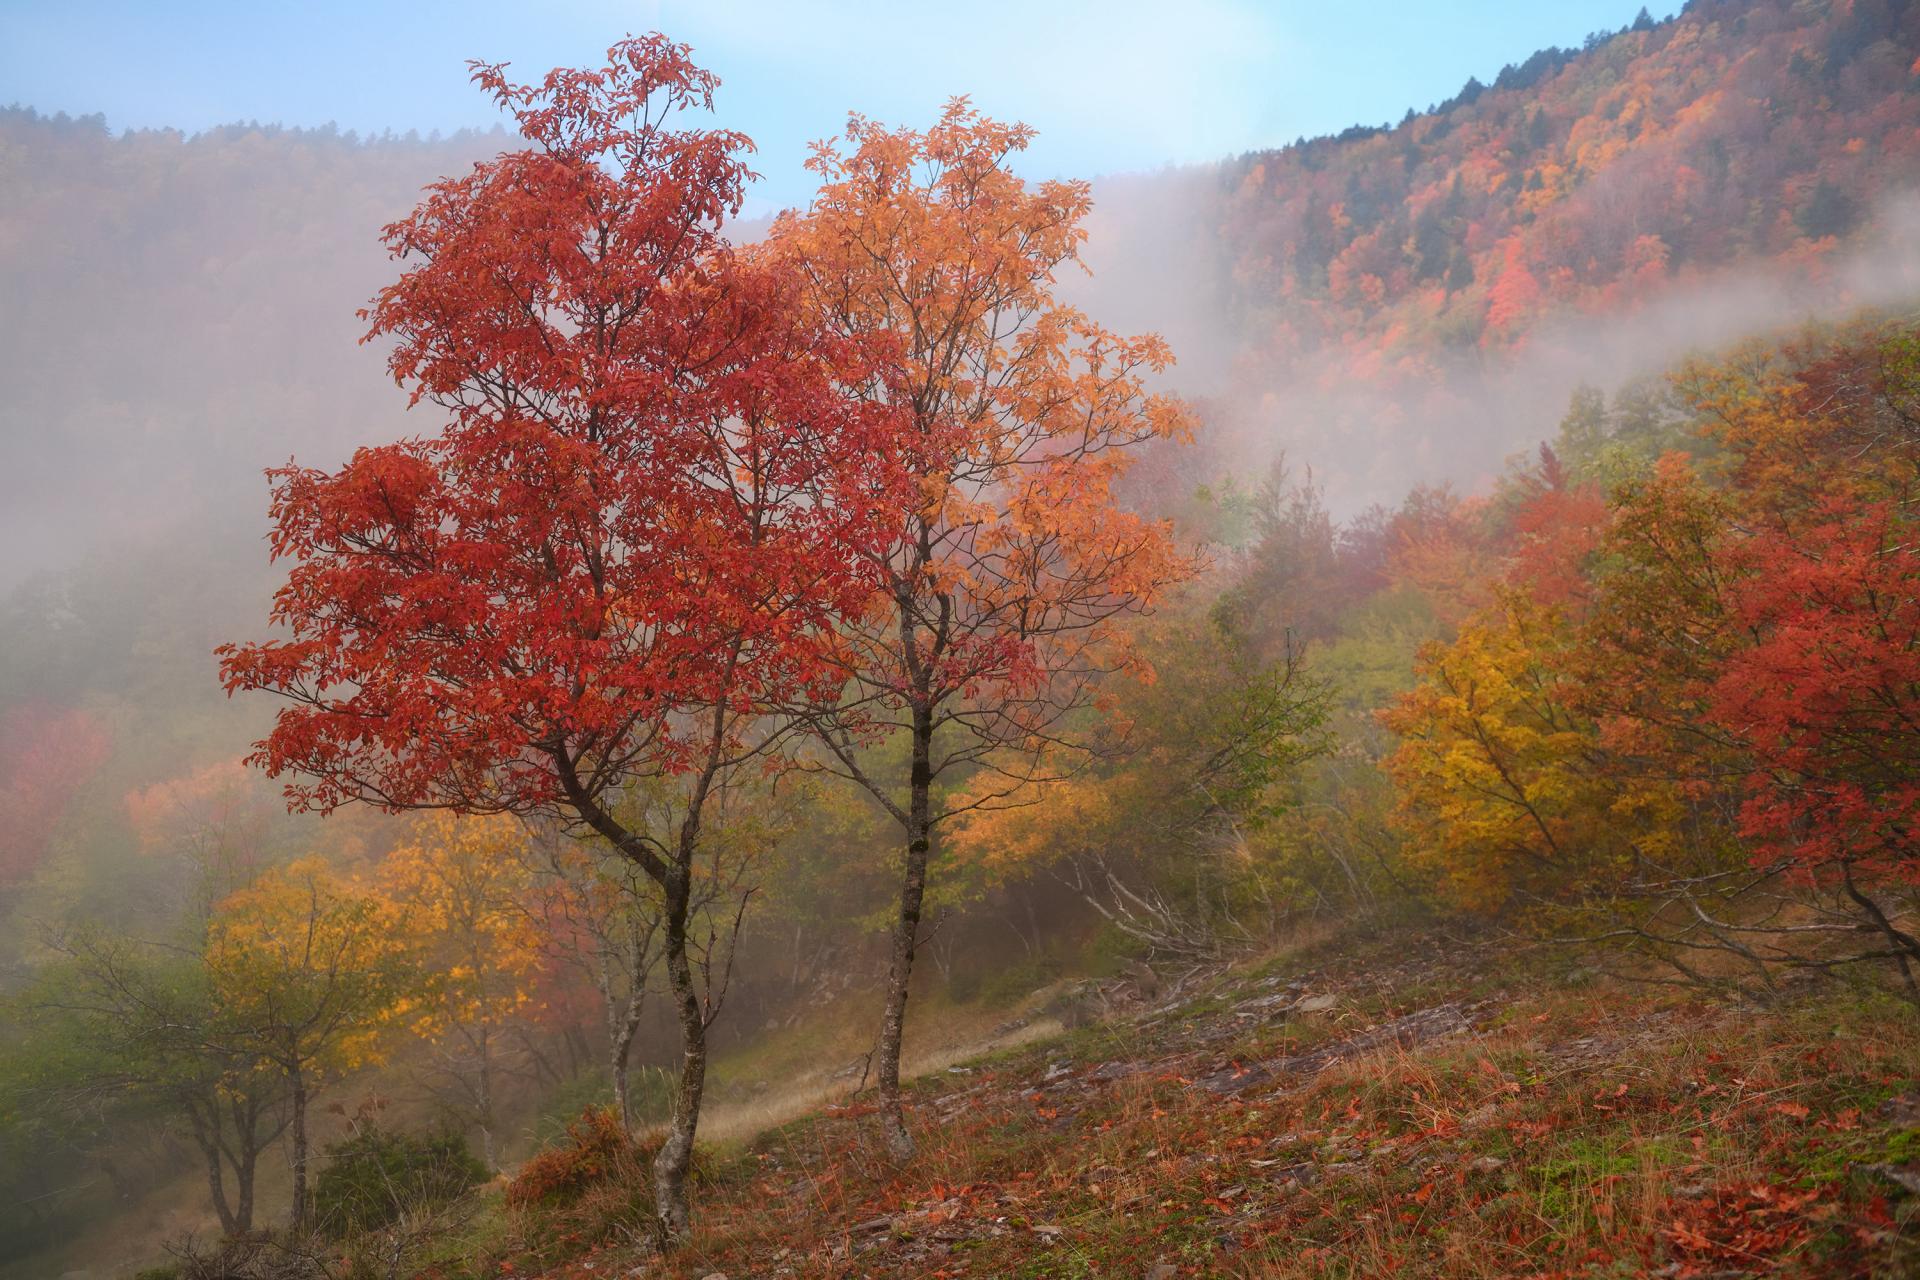 New York Photography Awards Winner - Fall Foliage in Foreste Casentinesi National Park